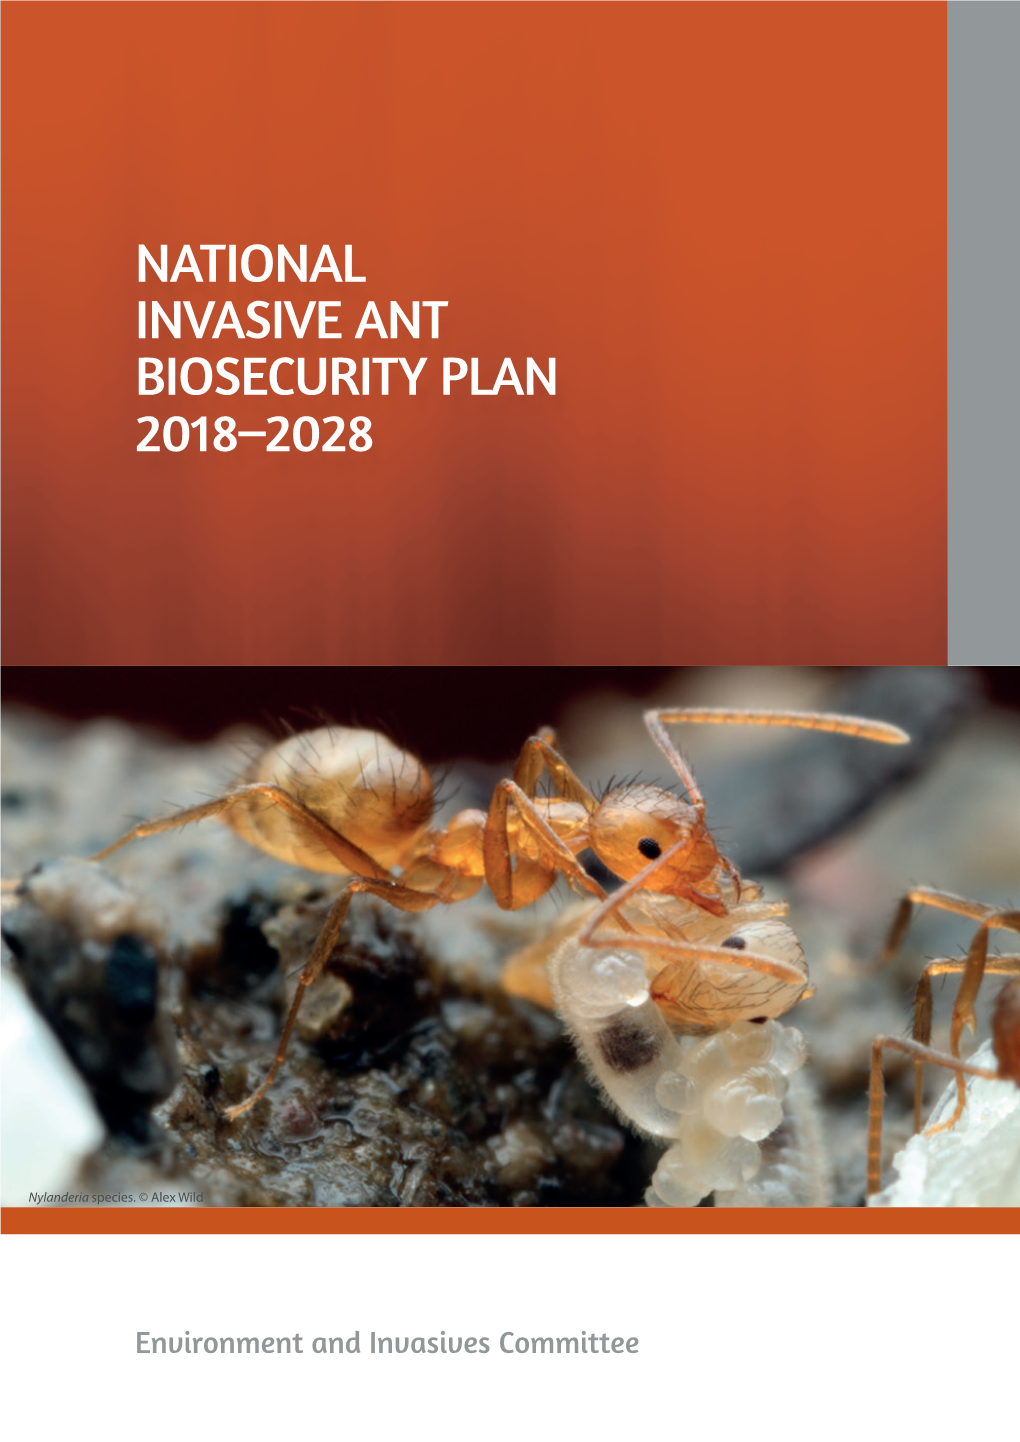 National Invasive Ant Biosecurity Plan 2018-2028